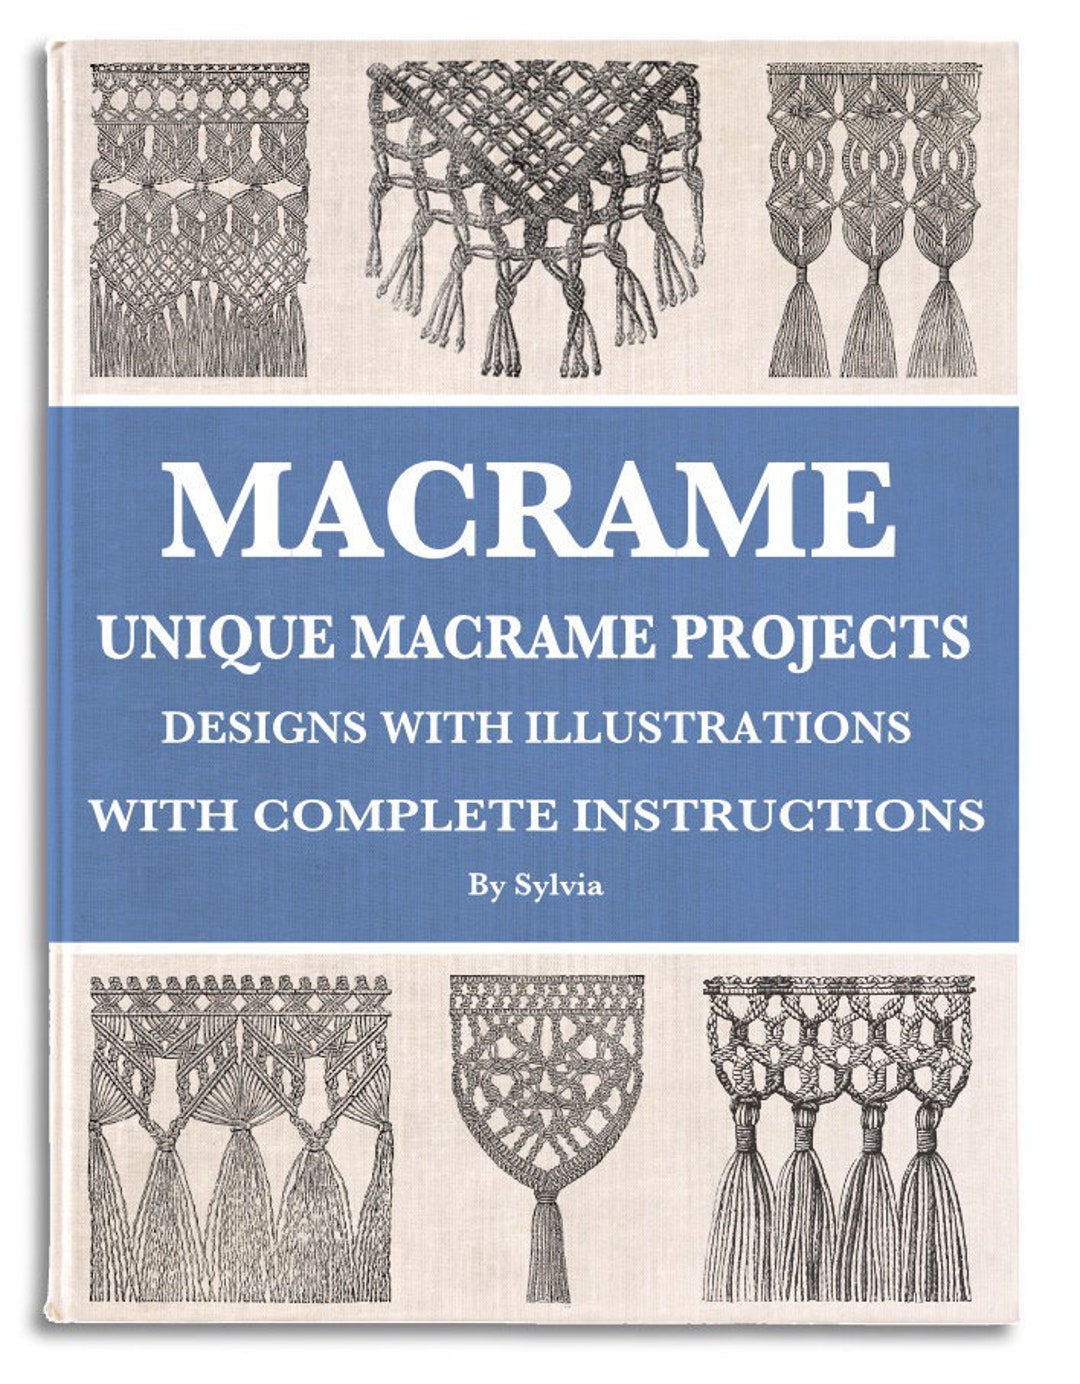 Macramè patterns: 2 Books in 1 - The Beginner's Guide to Making Creative  Ideas, Jewelry and Gift Projects. PLUS easy-to-follow Illustrations to  Create